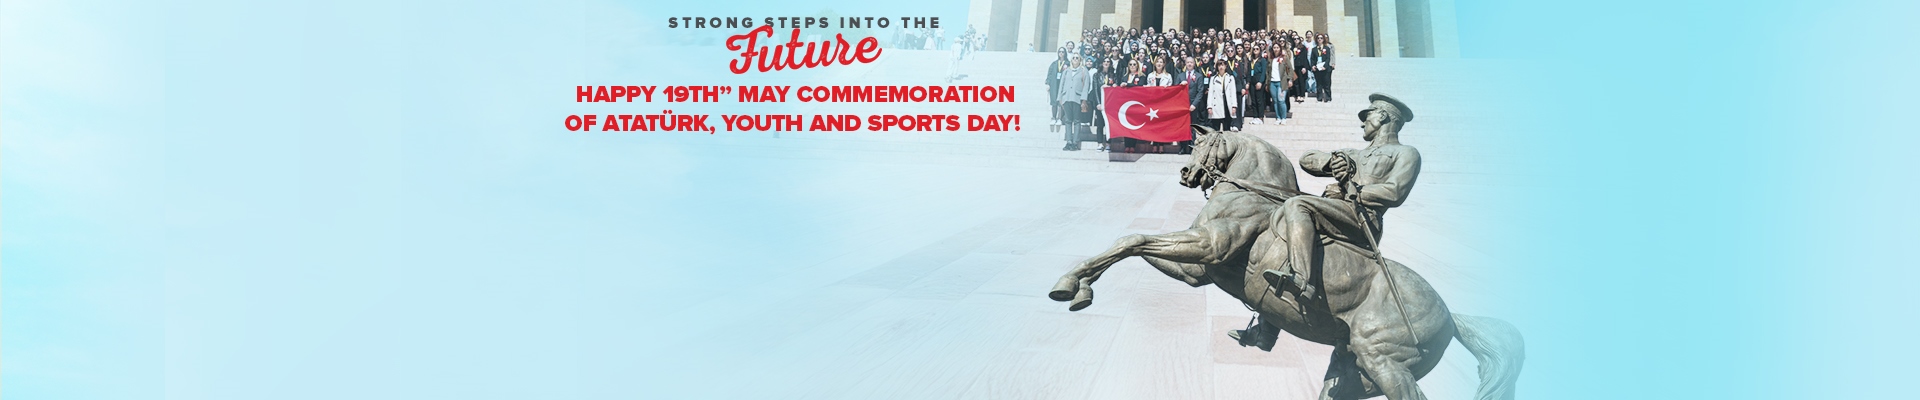 Happy 19th May Commemoration of Atatürk, Youth and Sports Day!